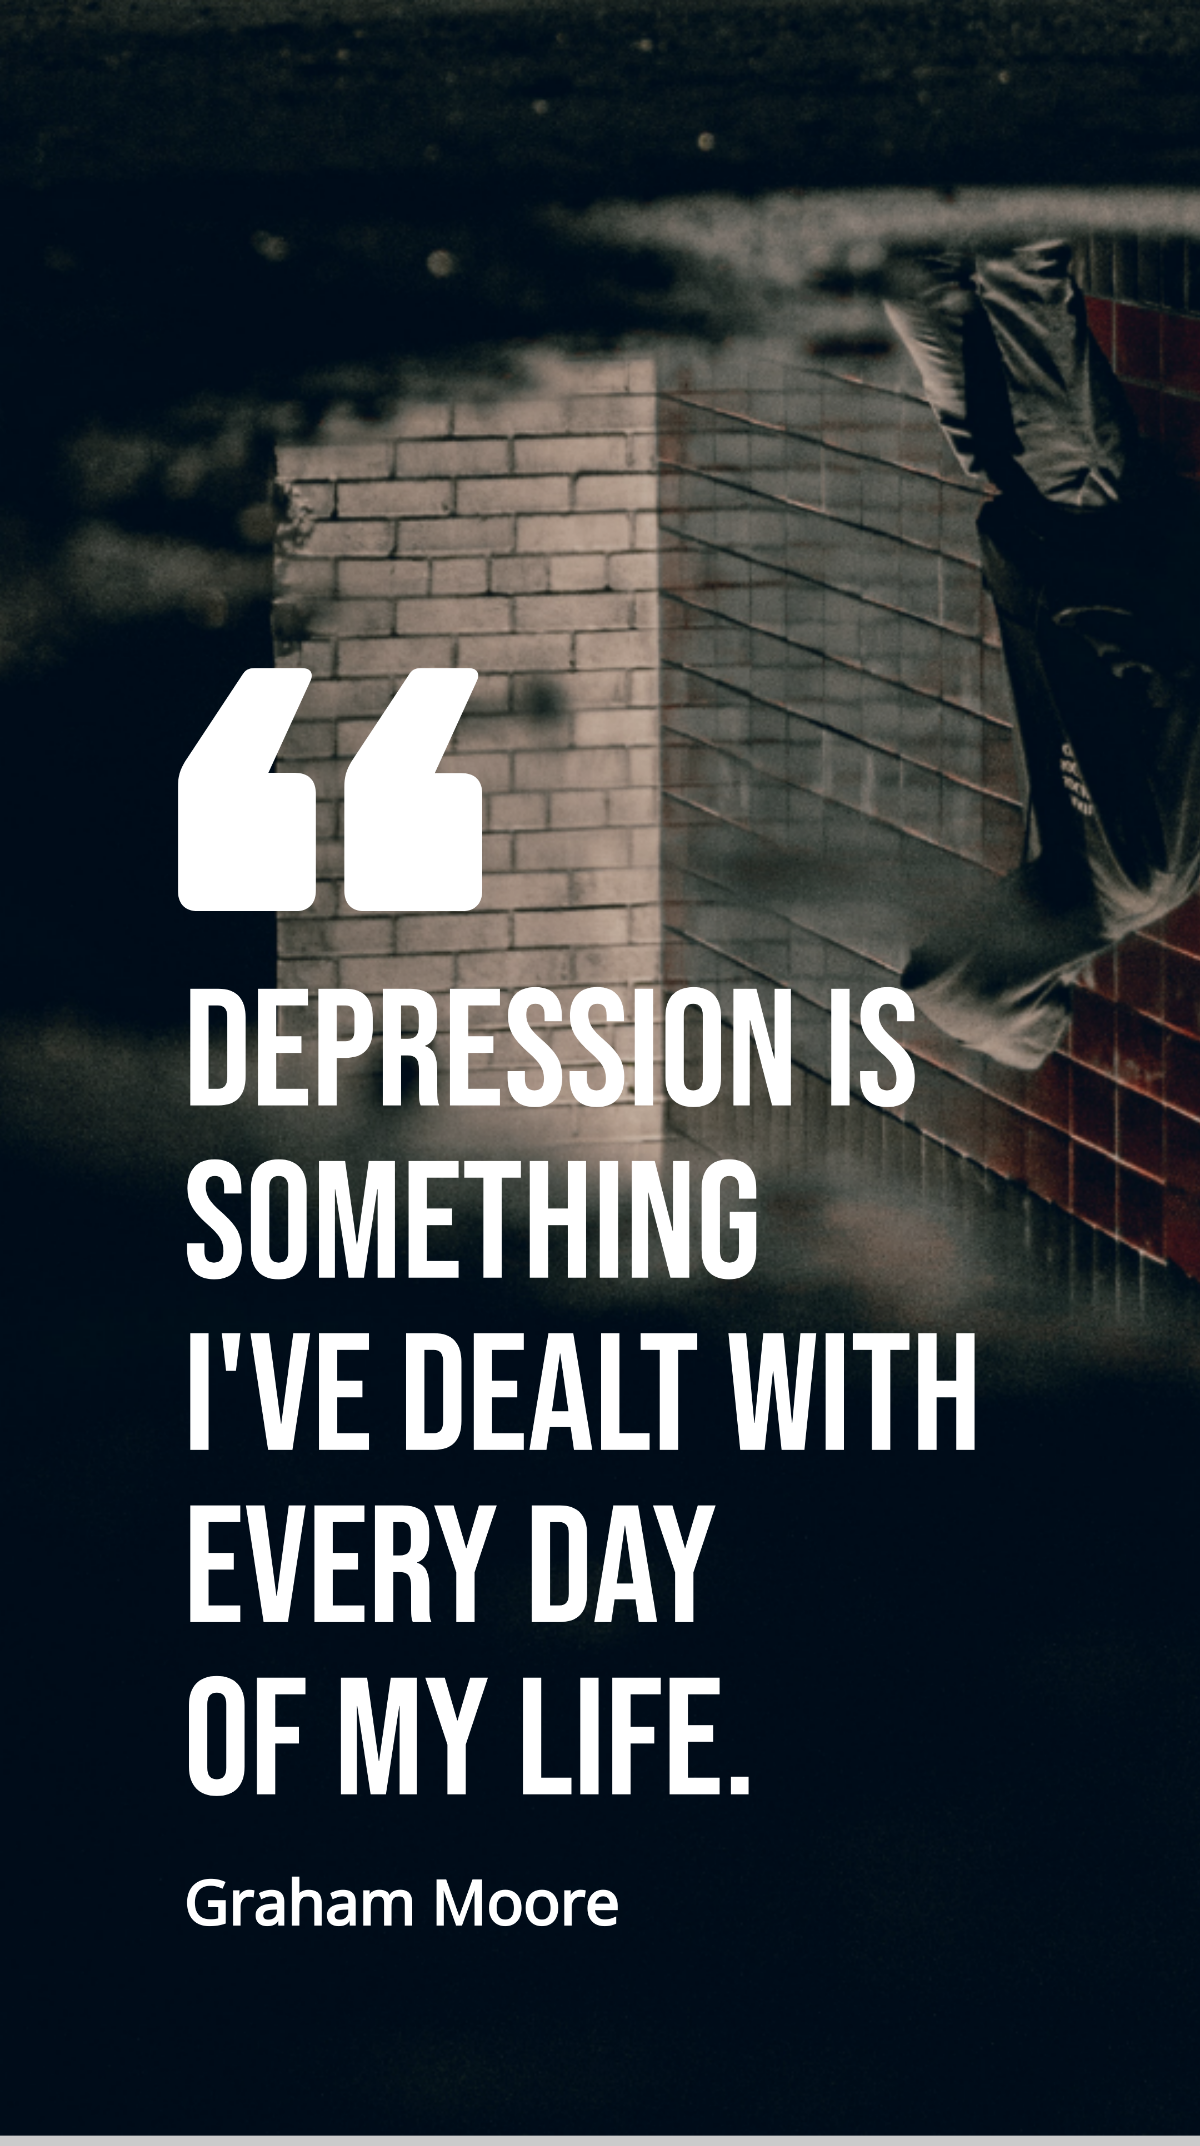 Graham Moore - Depression is something I've dealt with every day of my life. Template